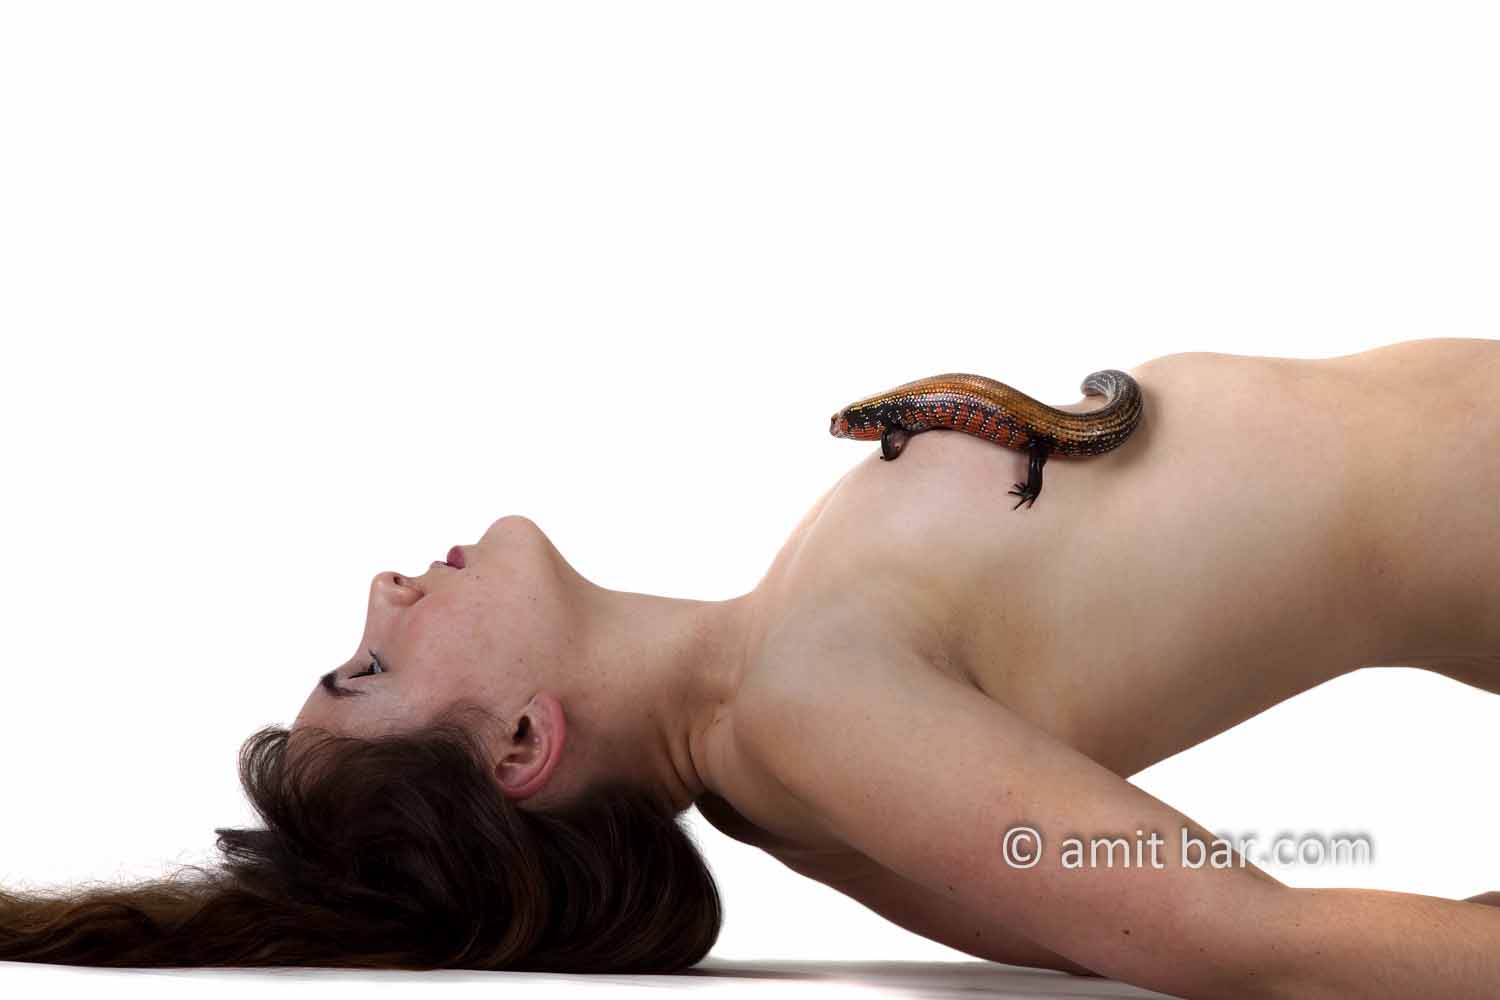 Fire skink: Fire skink on the breast of nude model